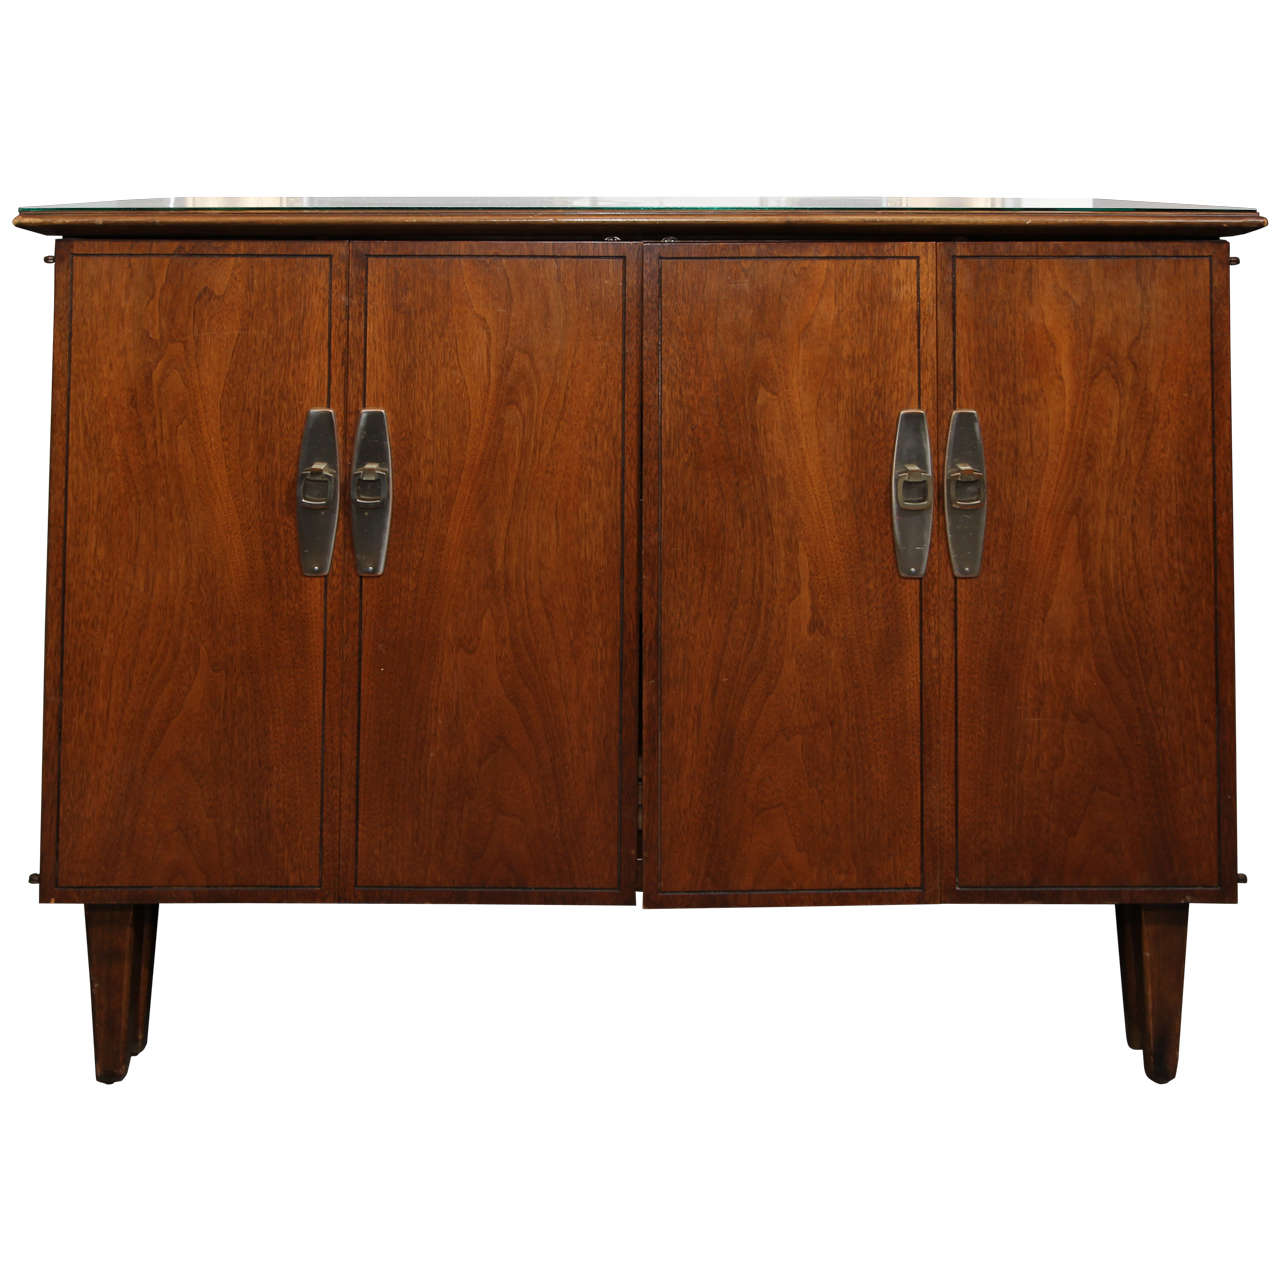 Hideaway Table - mid century cabinet that opens into table with 3 leaves 